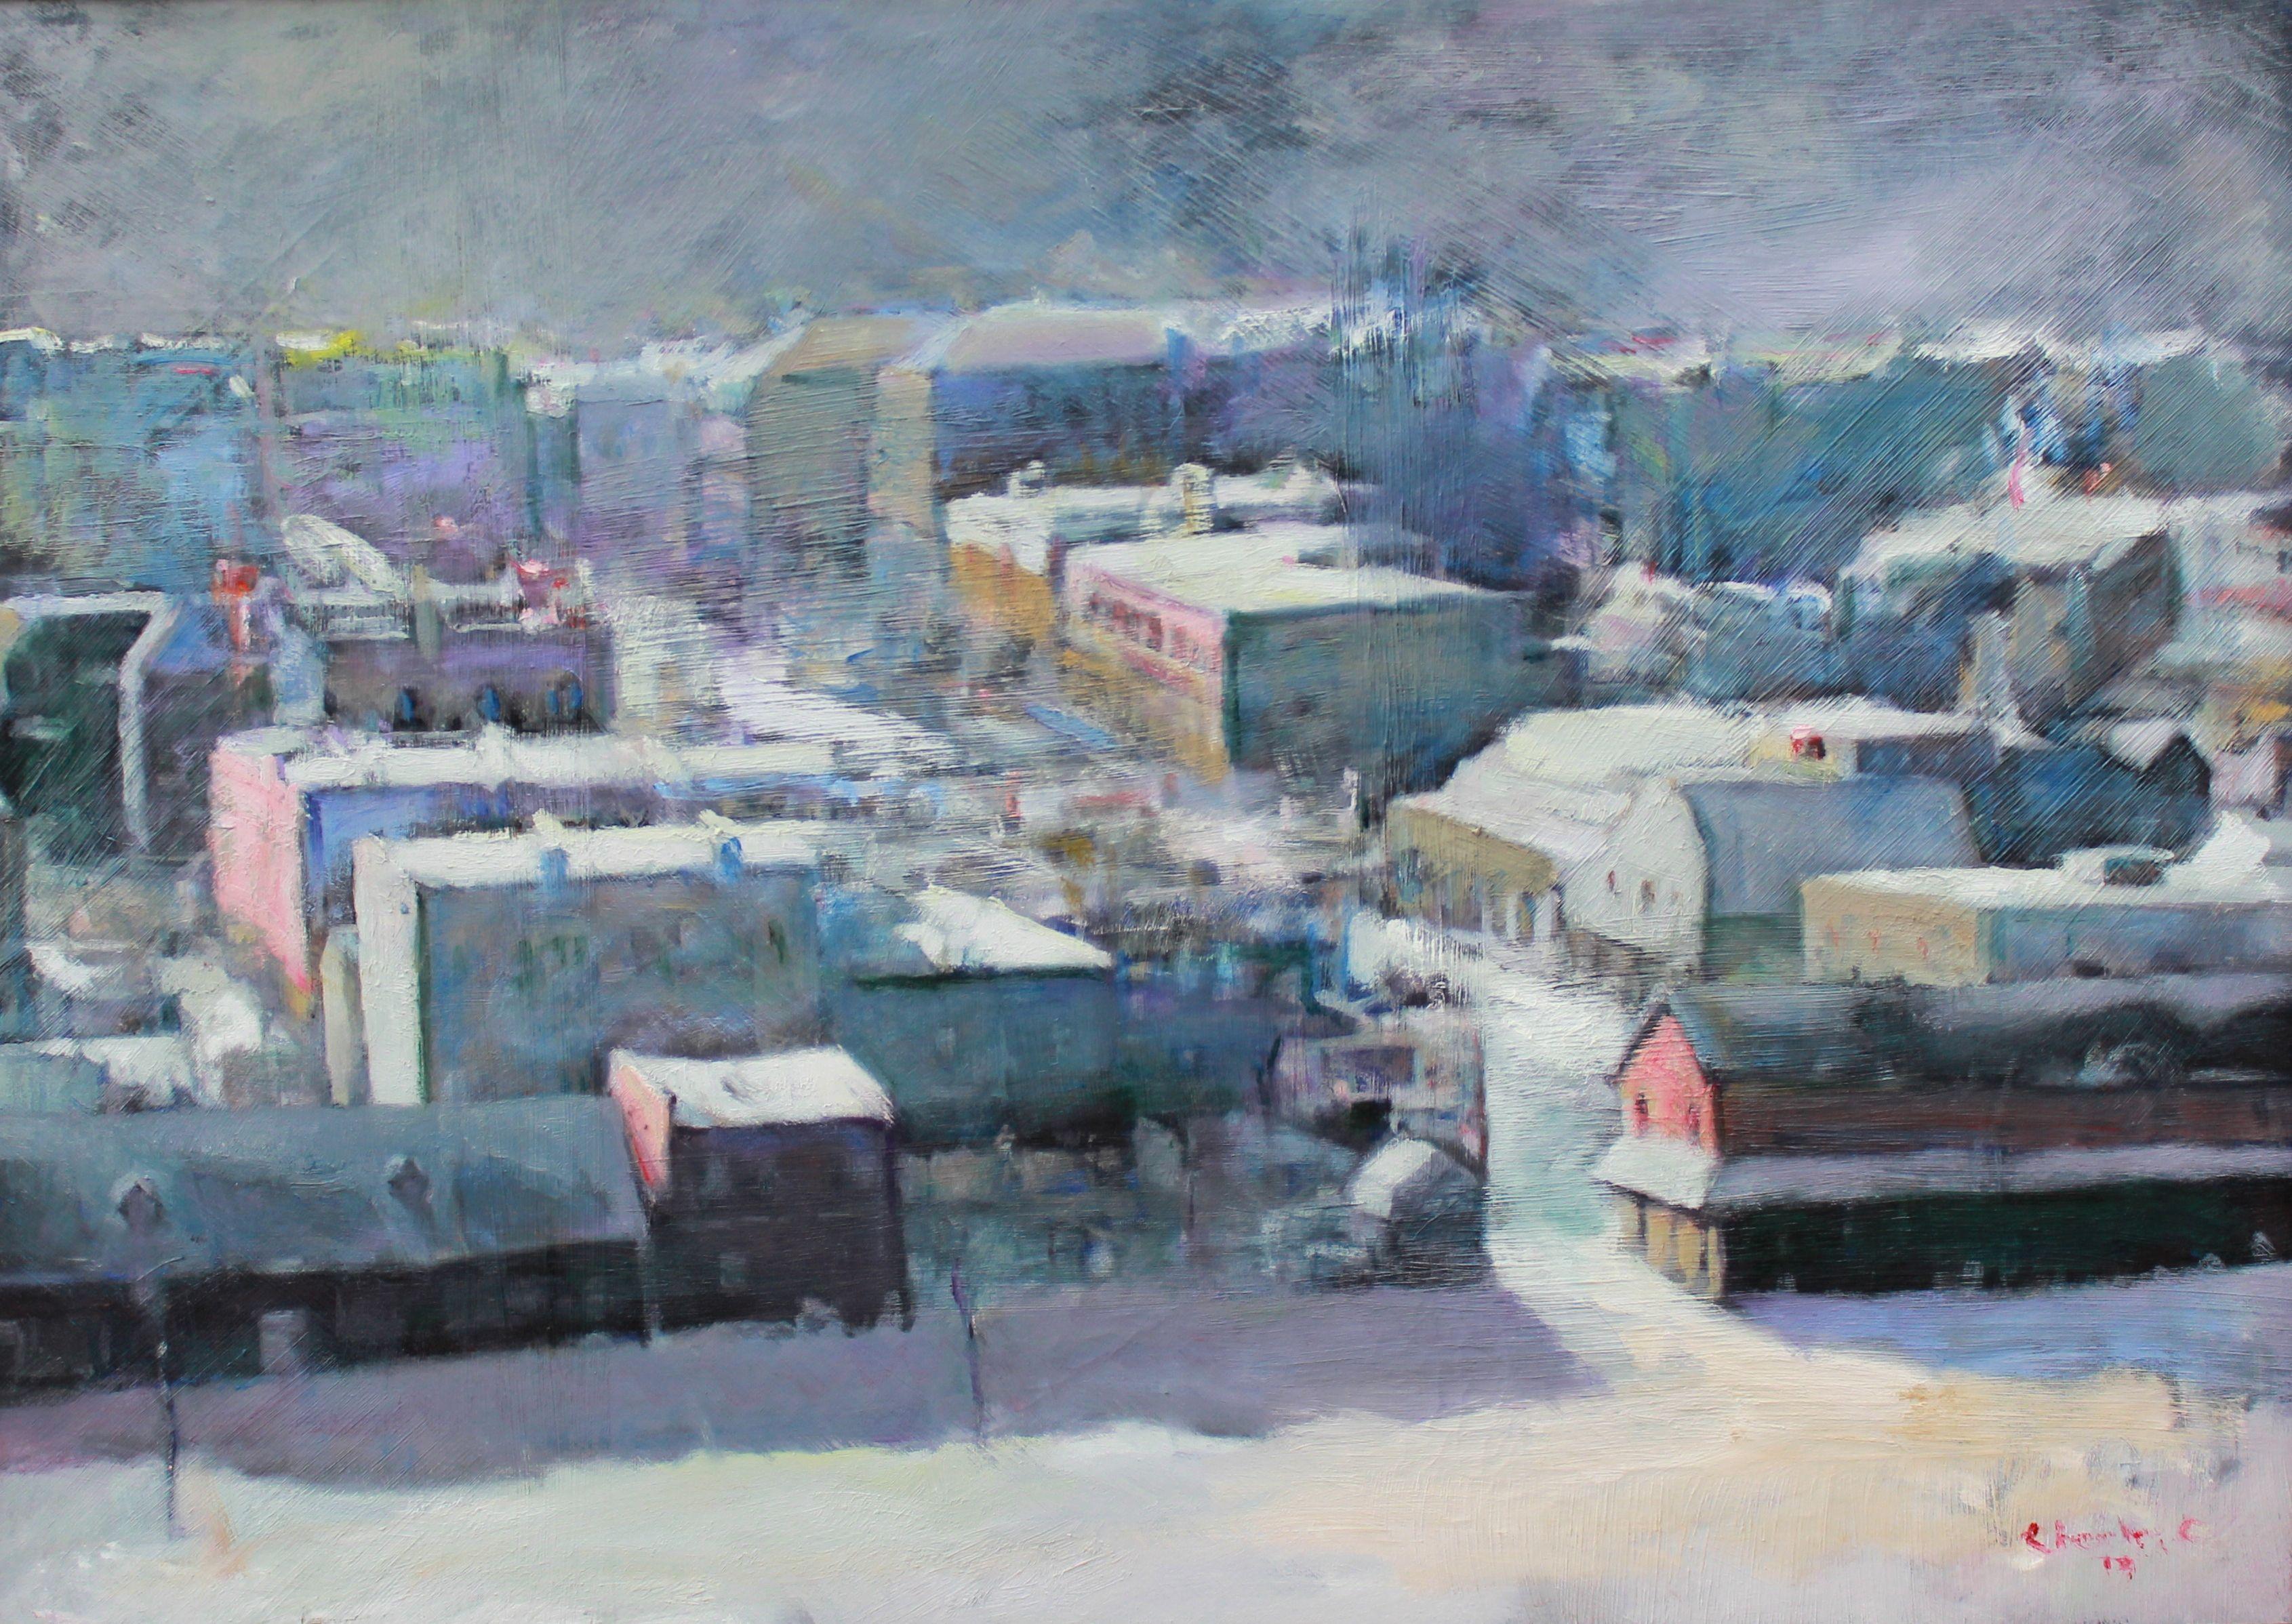 Storm in Calgary, Painting, Oil on Canvas